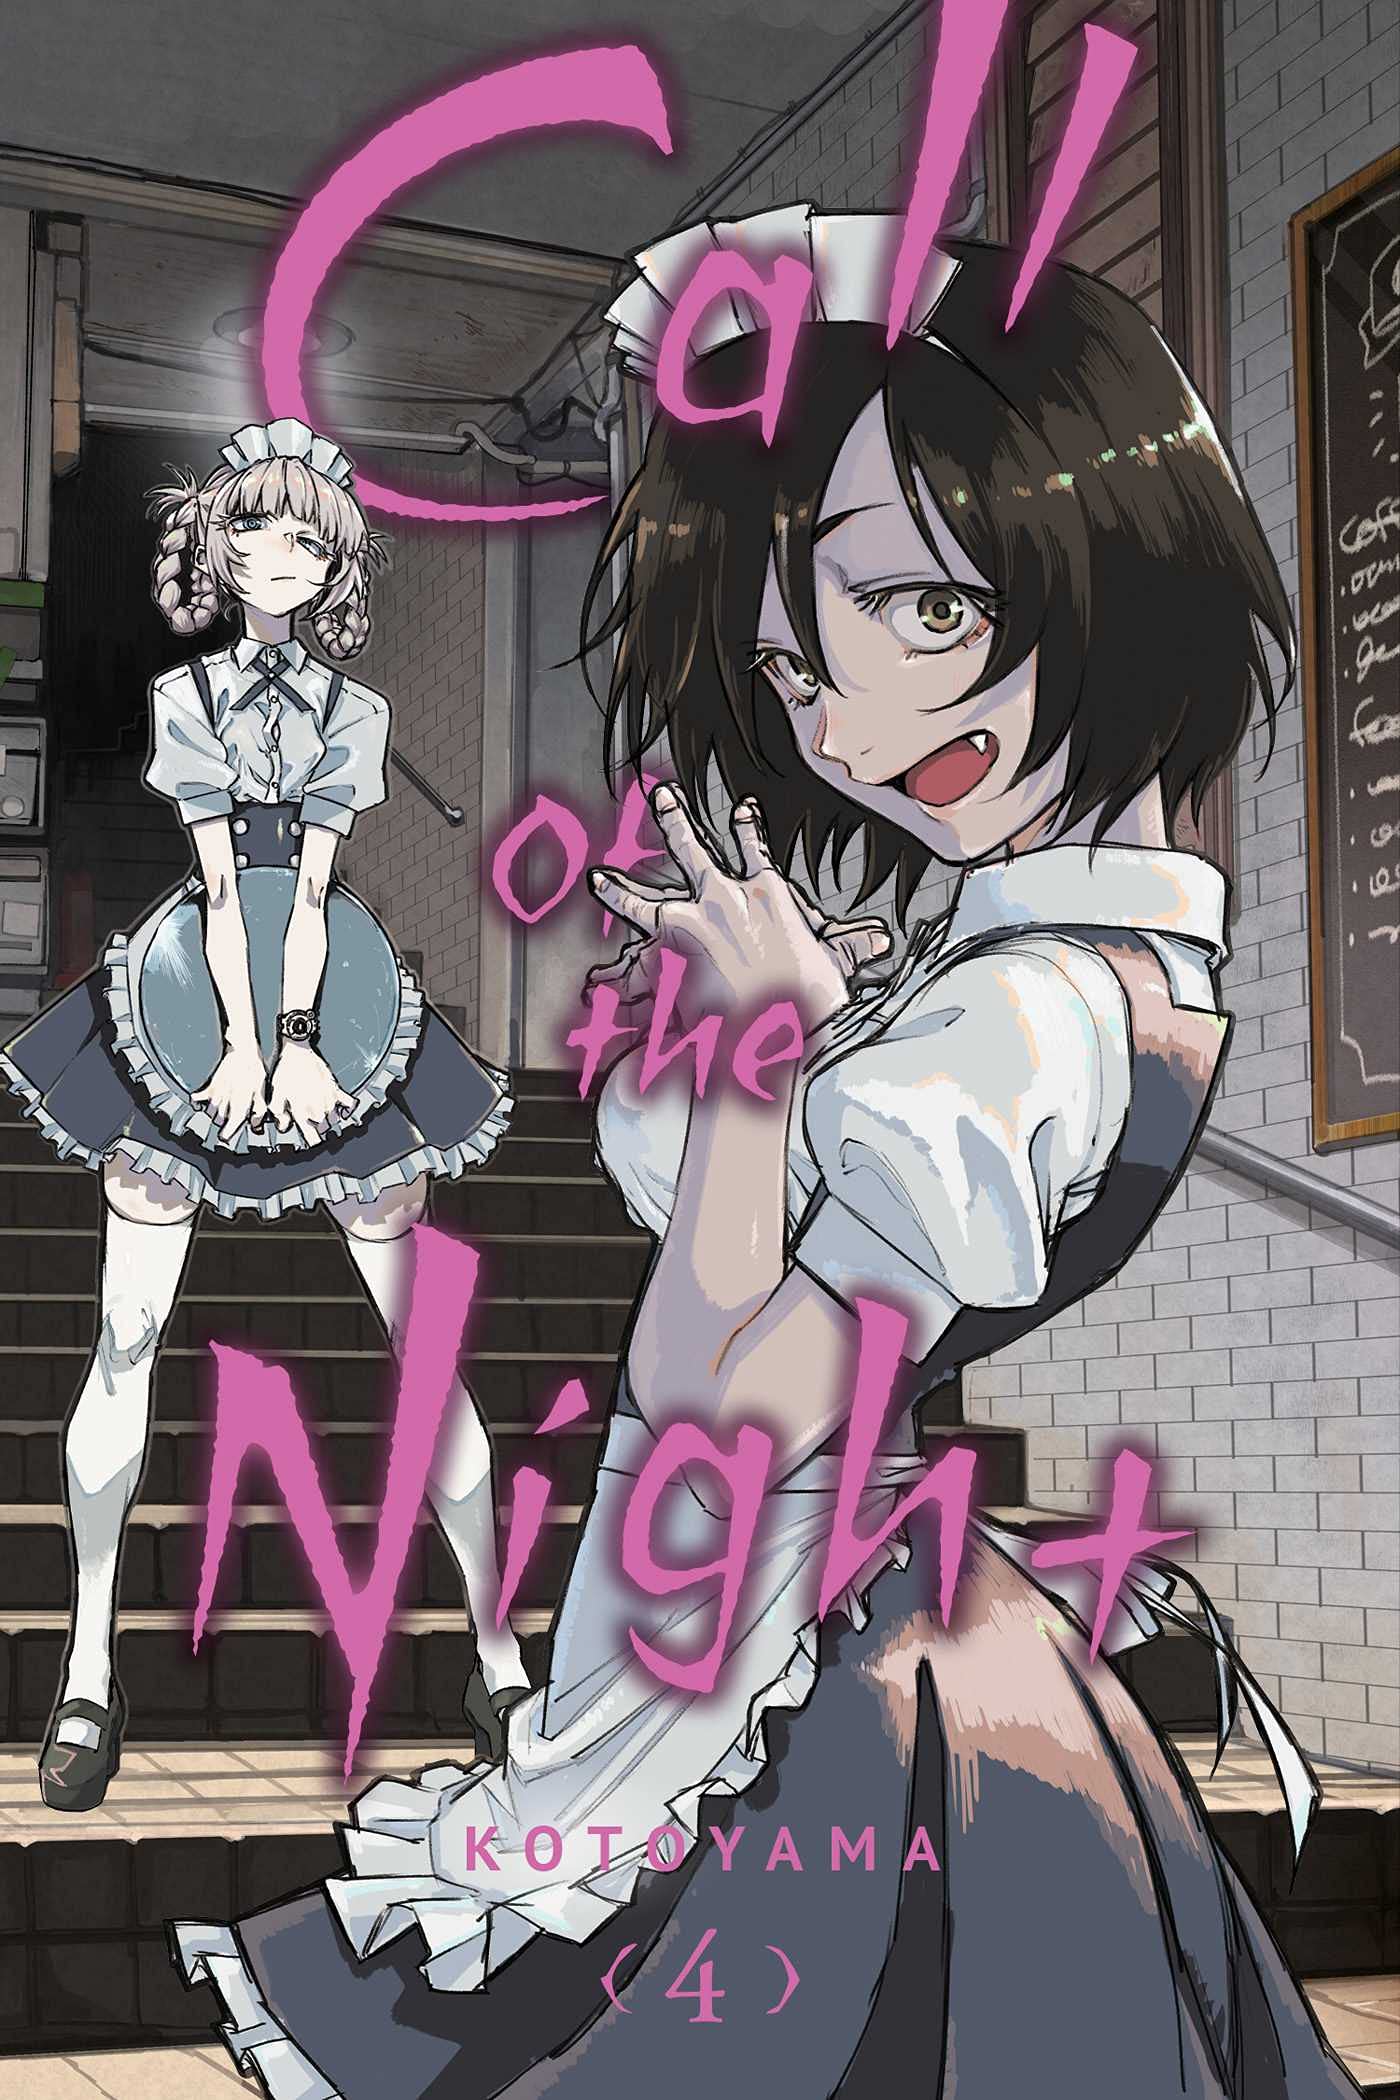 Call of the Night, Vol. 8 (8) by Kotoyama